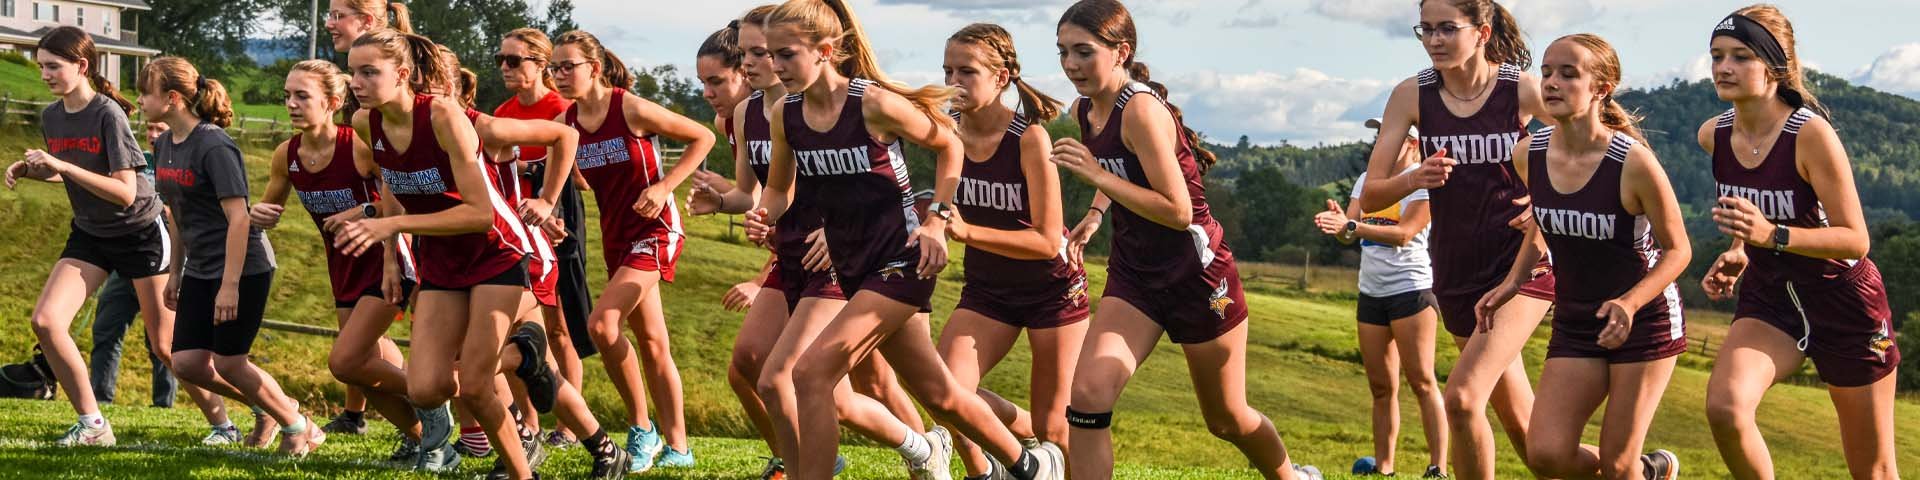 The LI Girls Cross Country team leaves the starting line at the start of the race course at Kingdom Trails. 